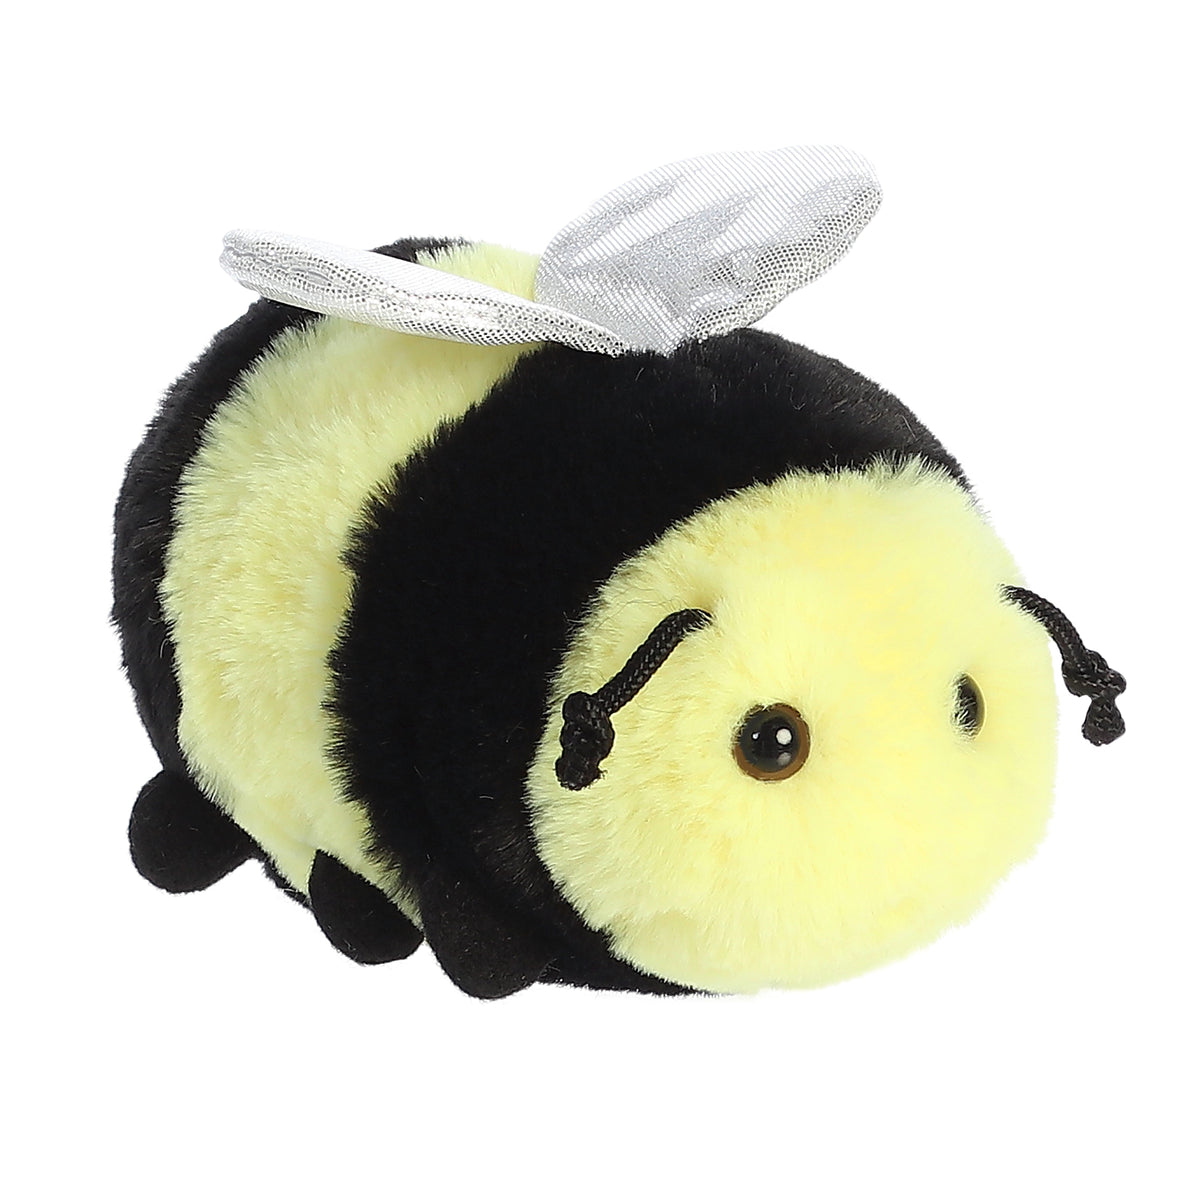 Charming yellow and black Beeswax Bee plush, soft and huggable, invites endless cuddly adventures in squishy round form!